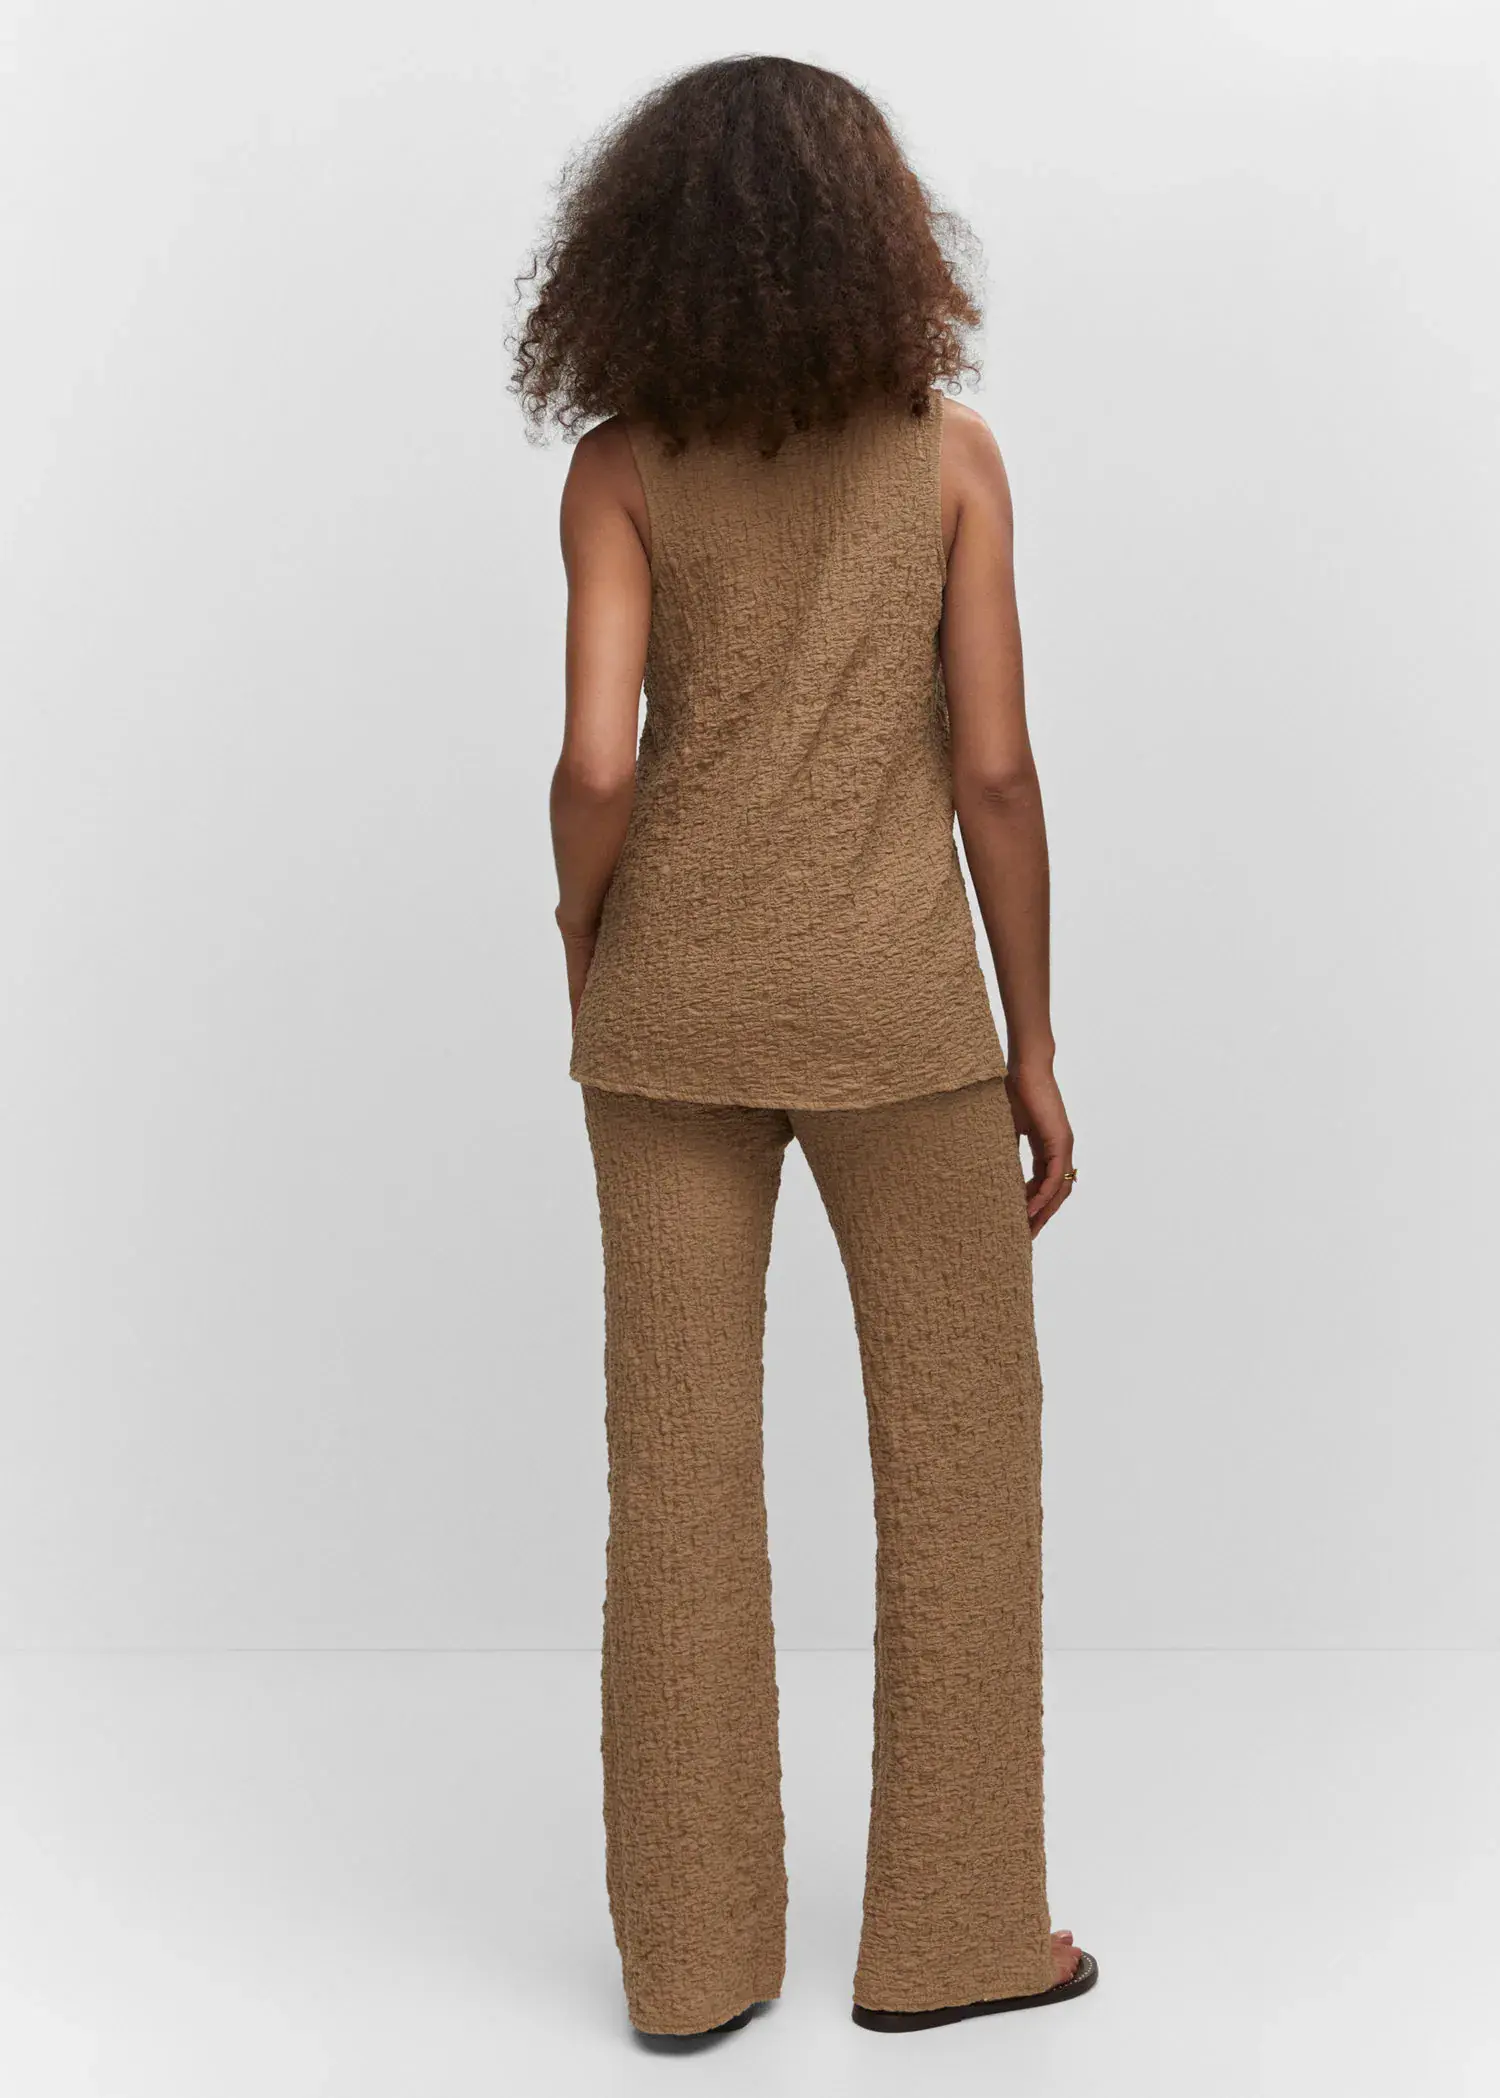 Mango Textured polo neck gilet. a woman in a tan outfit standing in front of a white wall. 